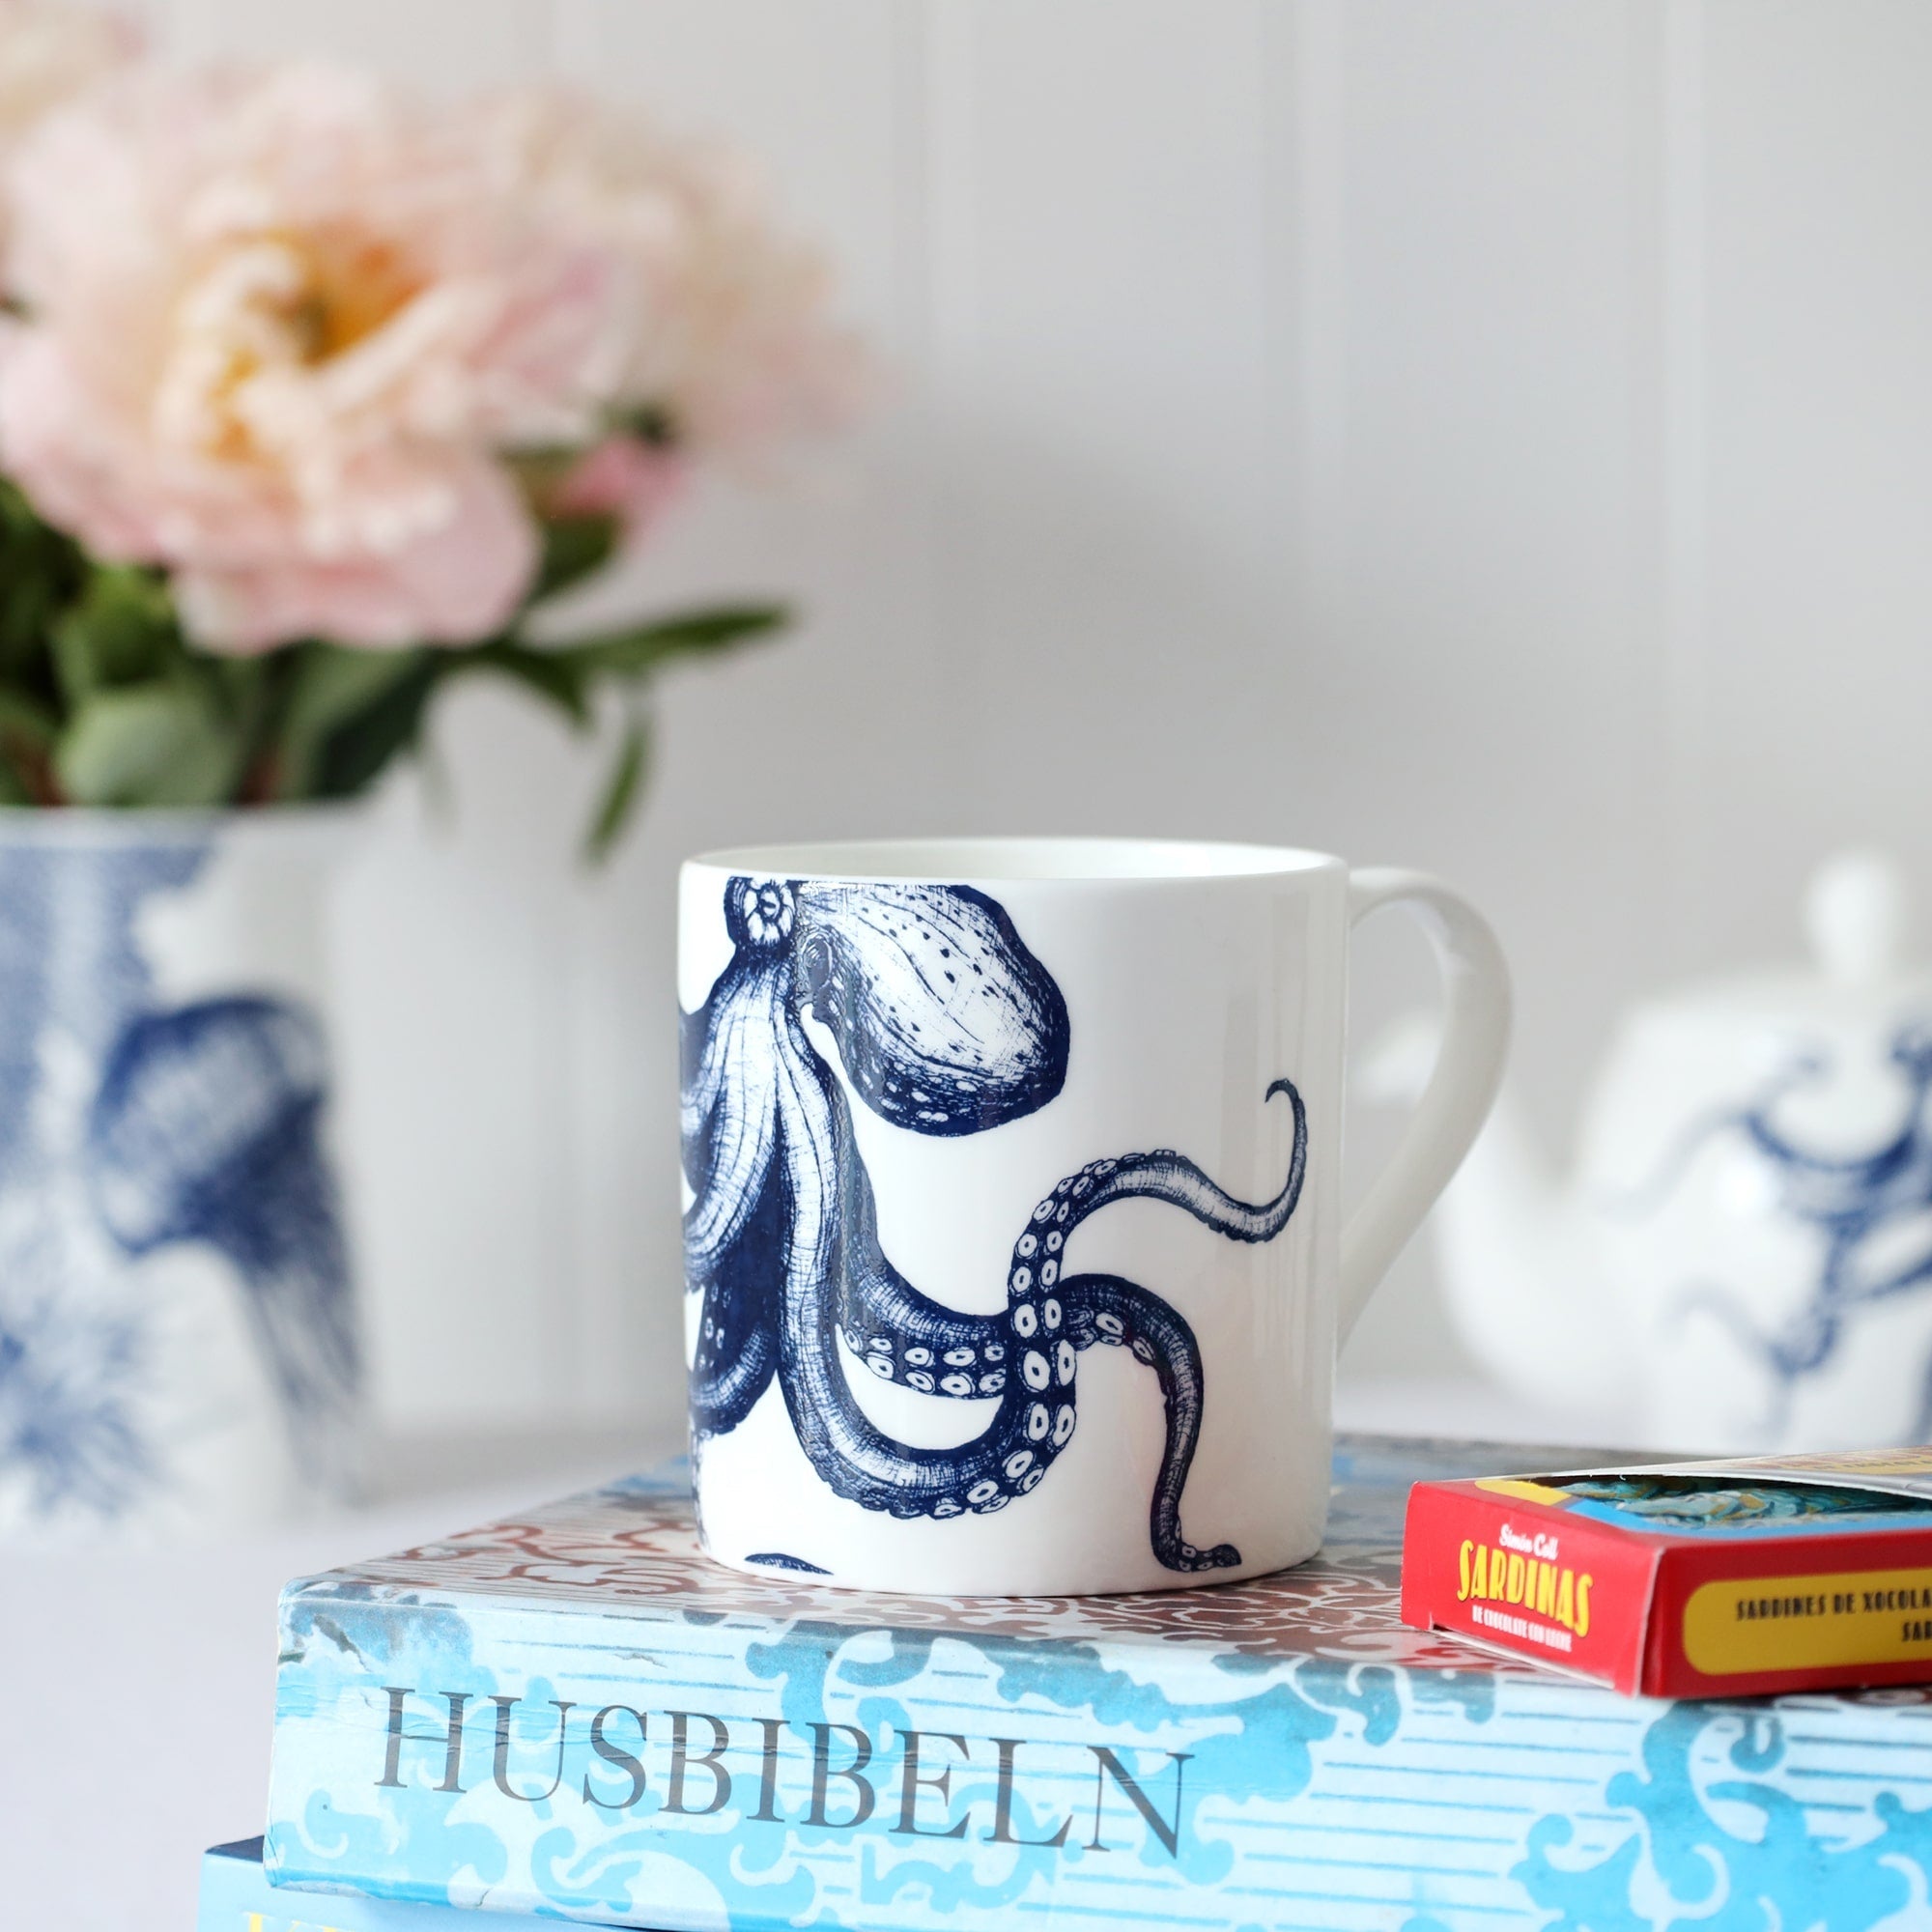 Close up of a white bone china mug with a blue illustrated octopus on it, sitting on a book with chocolate sardines and out of focus teapot & flowers in the background. 